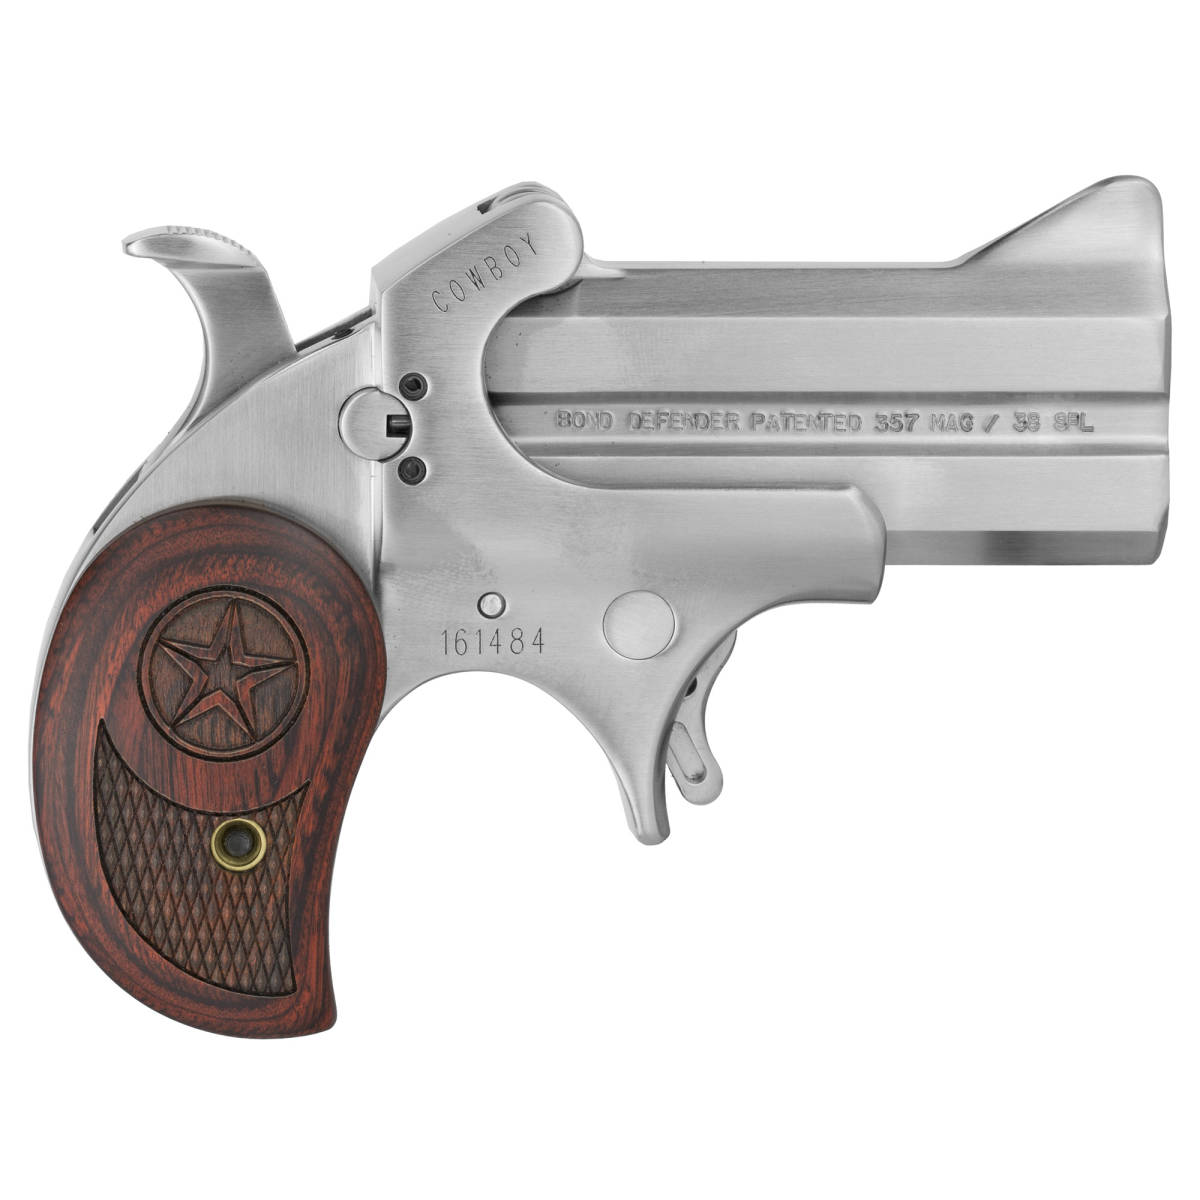 Bond Arms BACD Cowboy Defender 357 Mag/38 Sp 2rd 3” Barrel, Stainless...-img-1